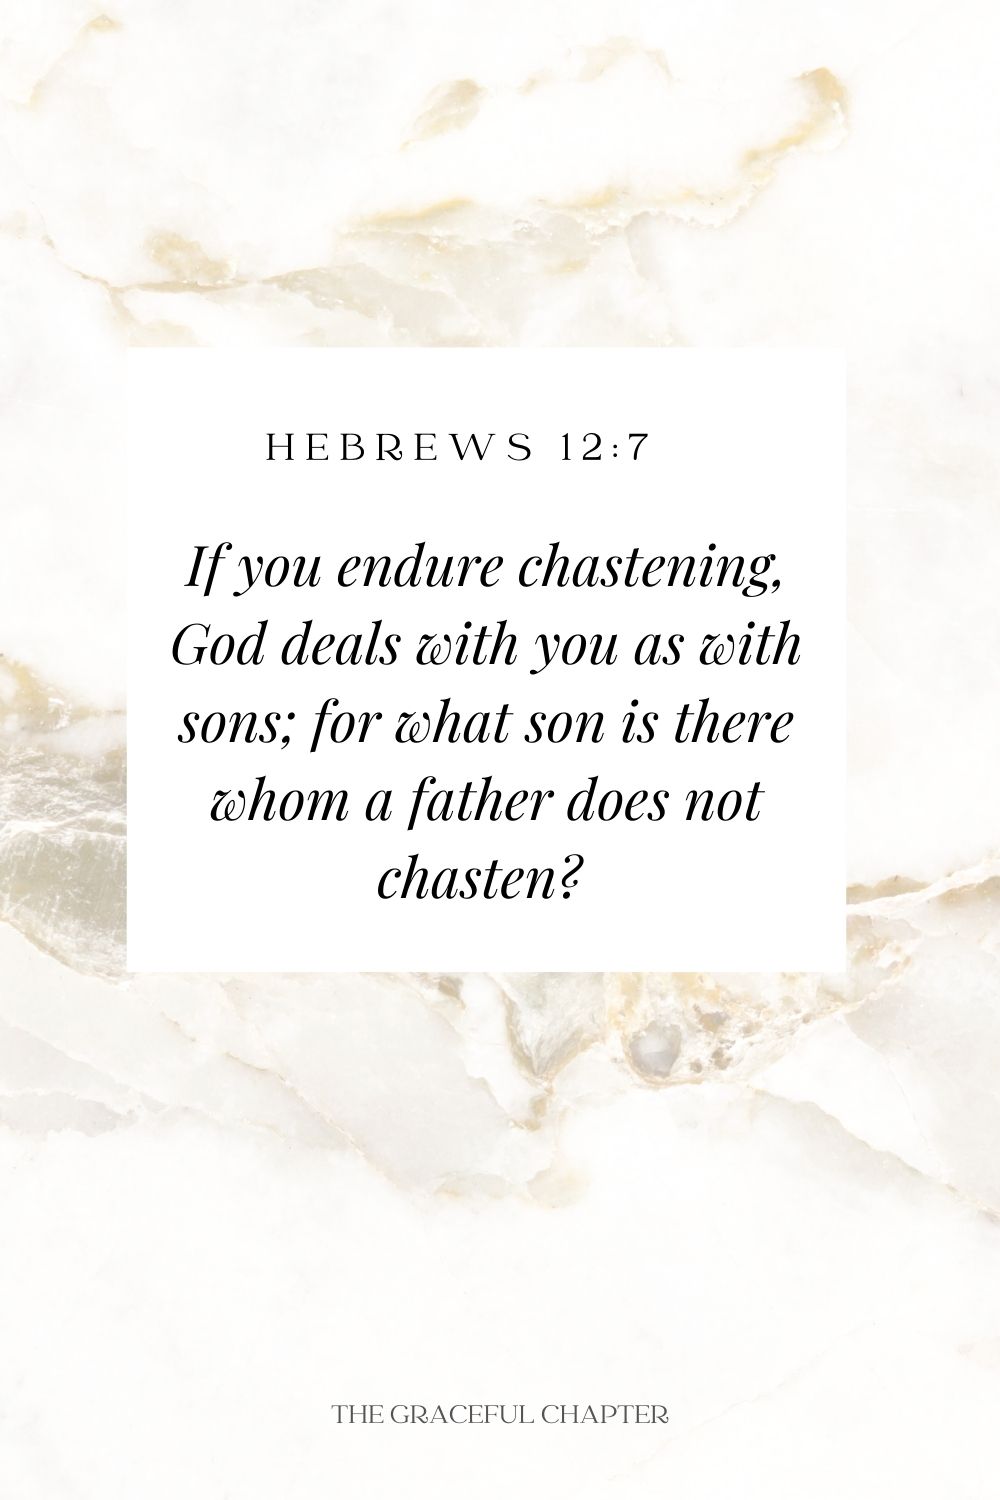 If you endure chastening, God deals with you as with sons; for what son is there whom a father does not chasten?  Hebrews 12:7